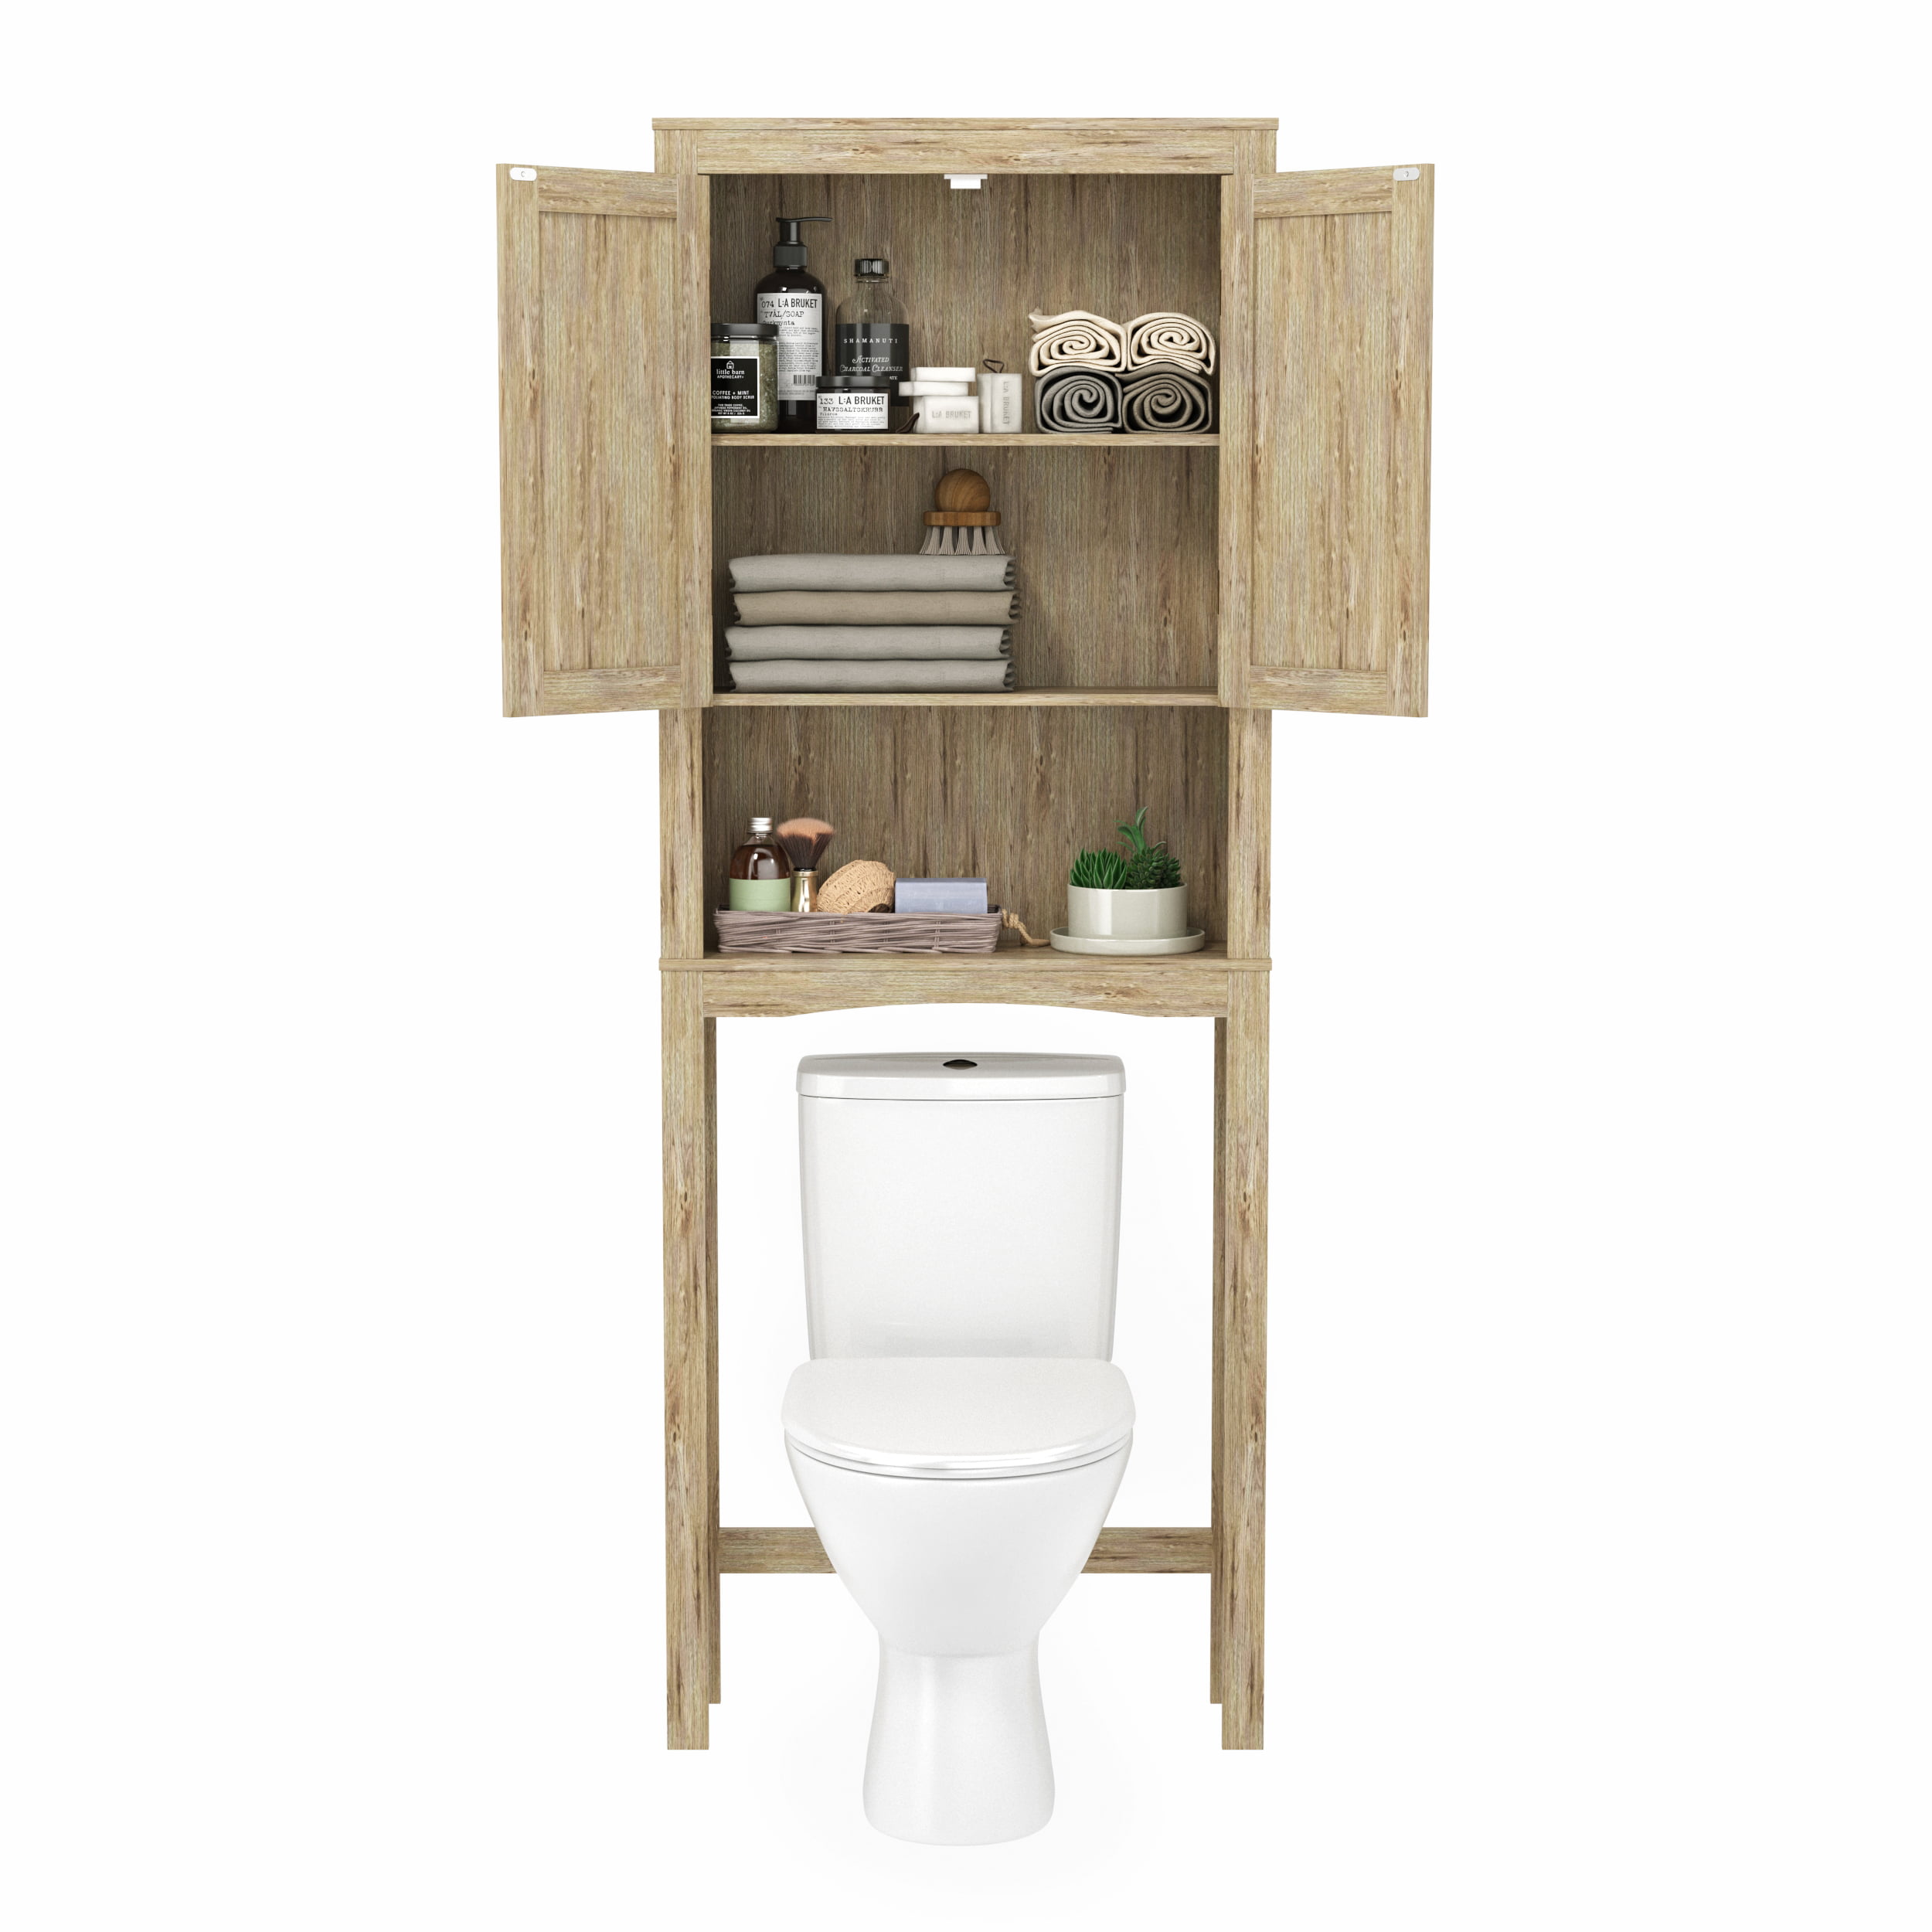 Wood Bathroom Cabinet, Toilet Over the Toilet Space Saver w/ 3-Shelves ...